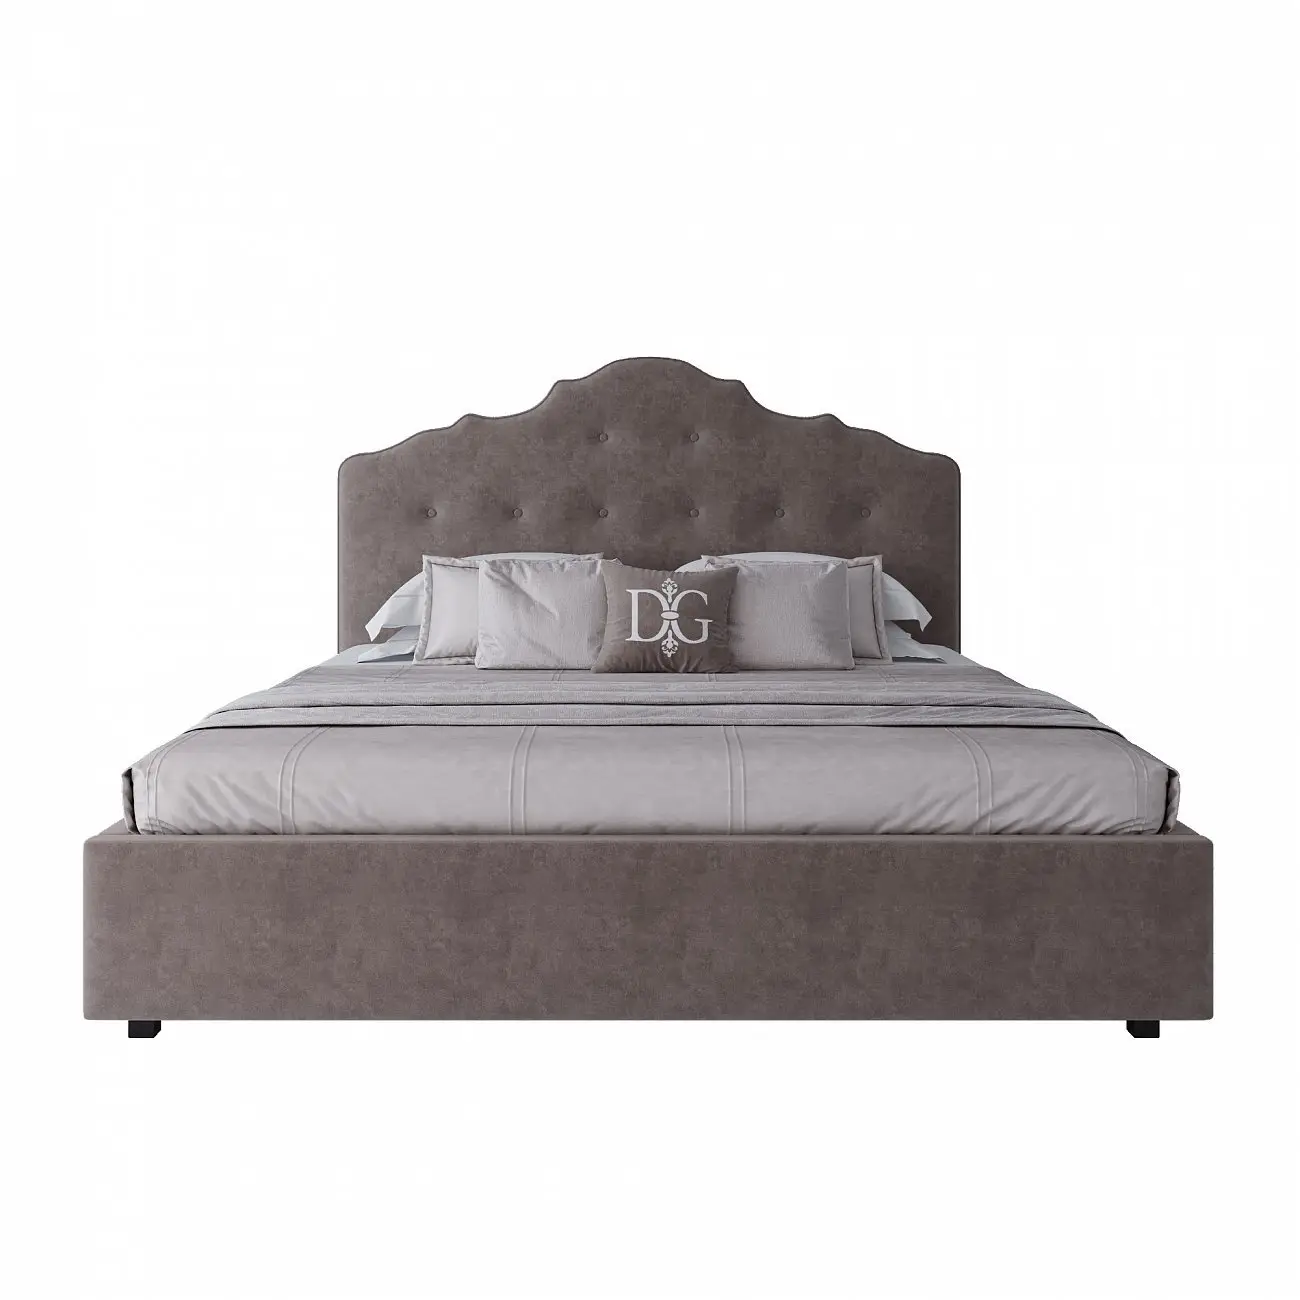 Double bed 180x200 cm grey-brown Palace